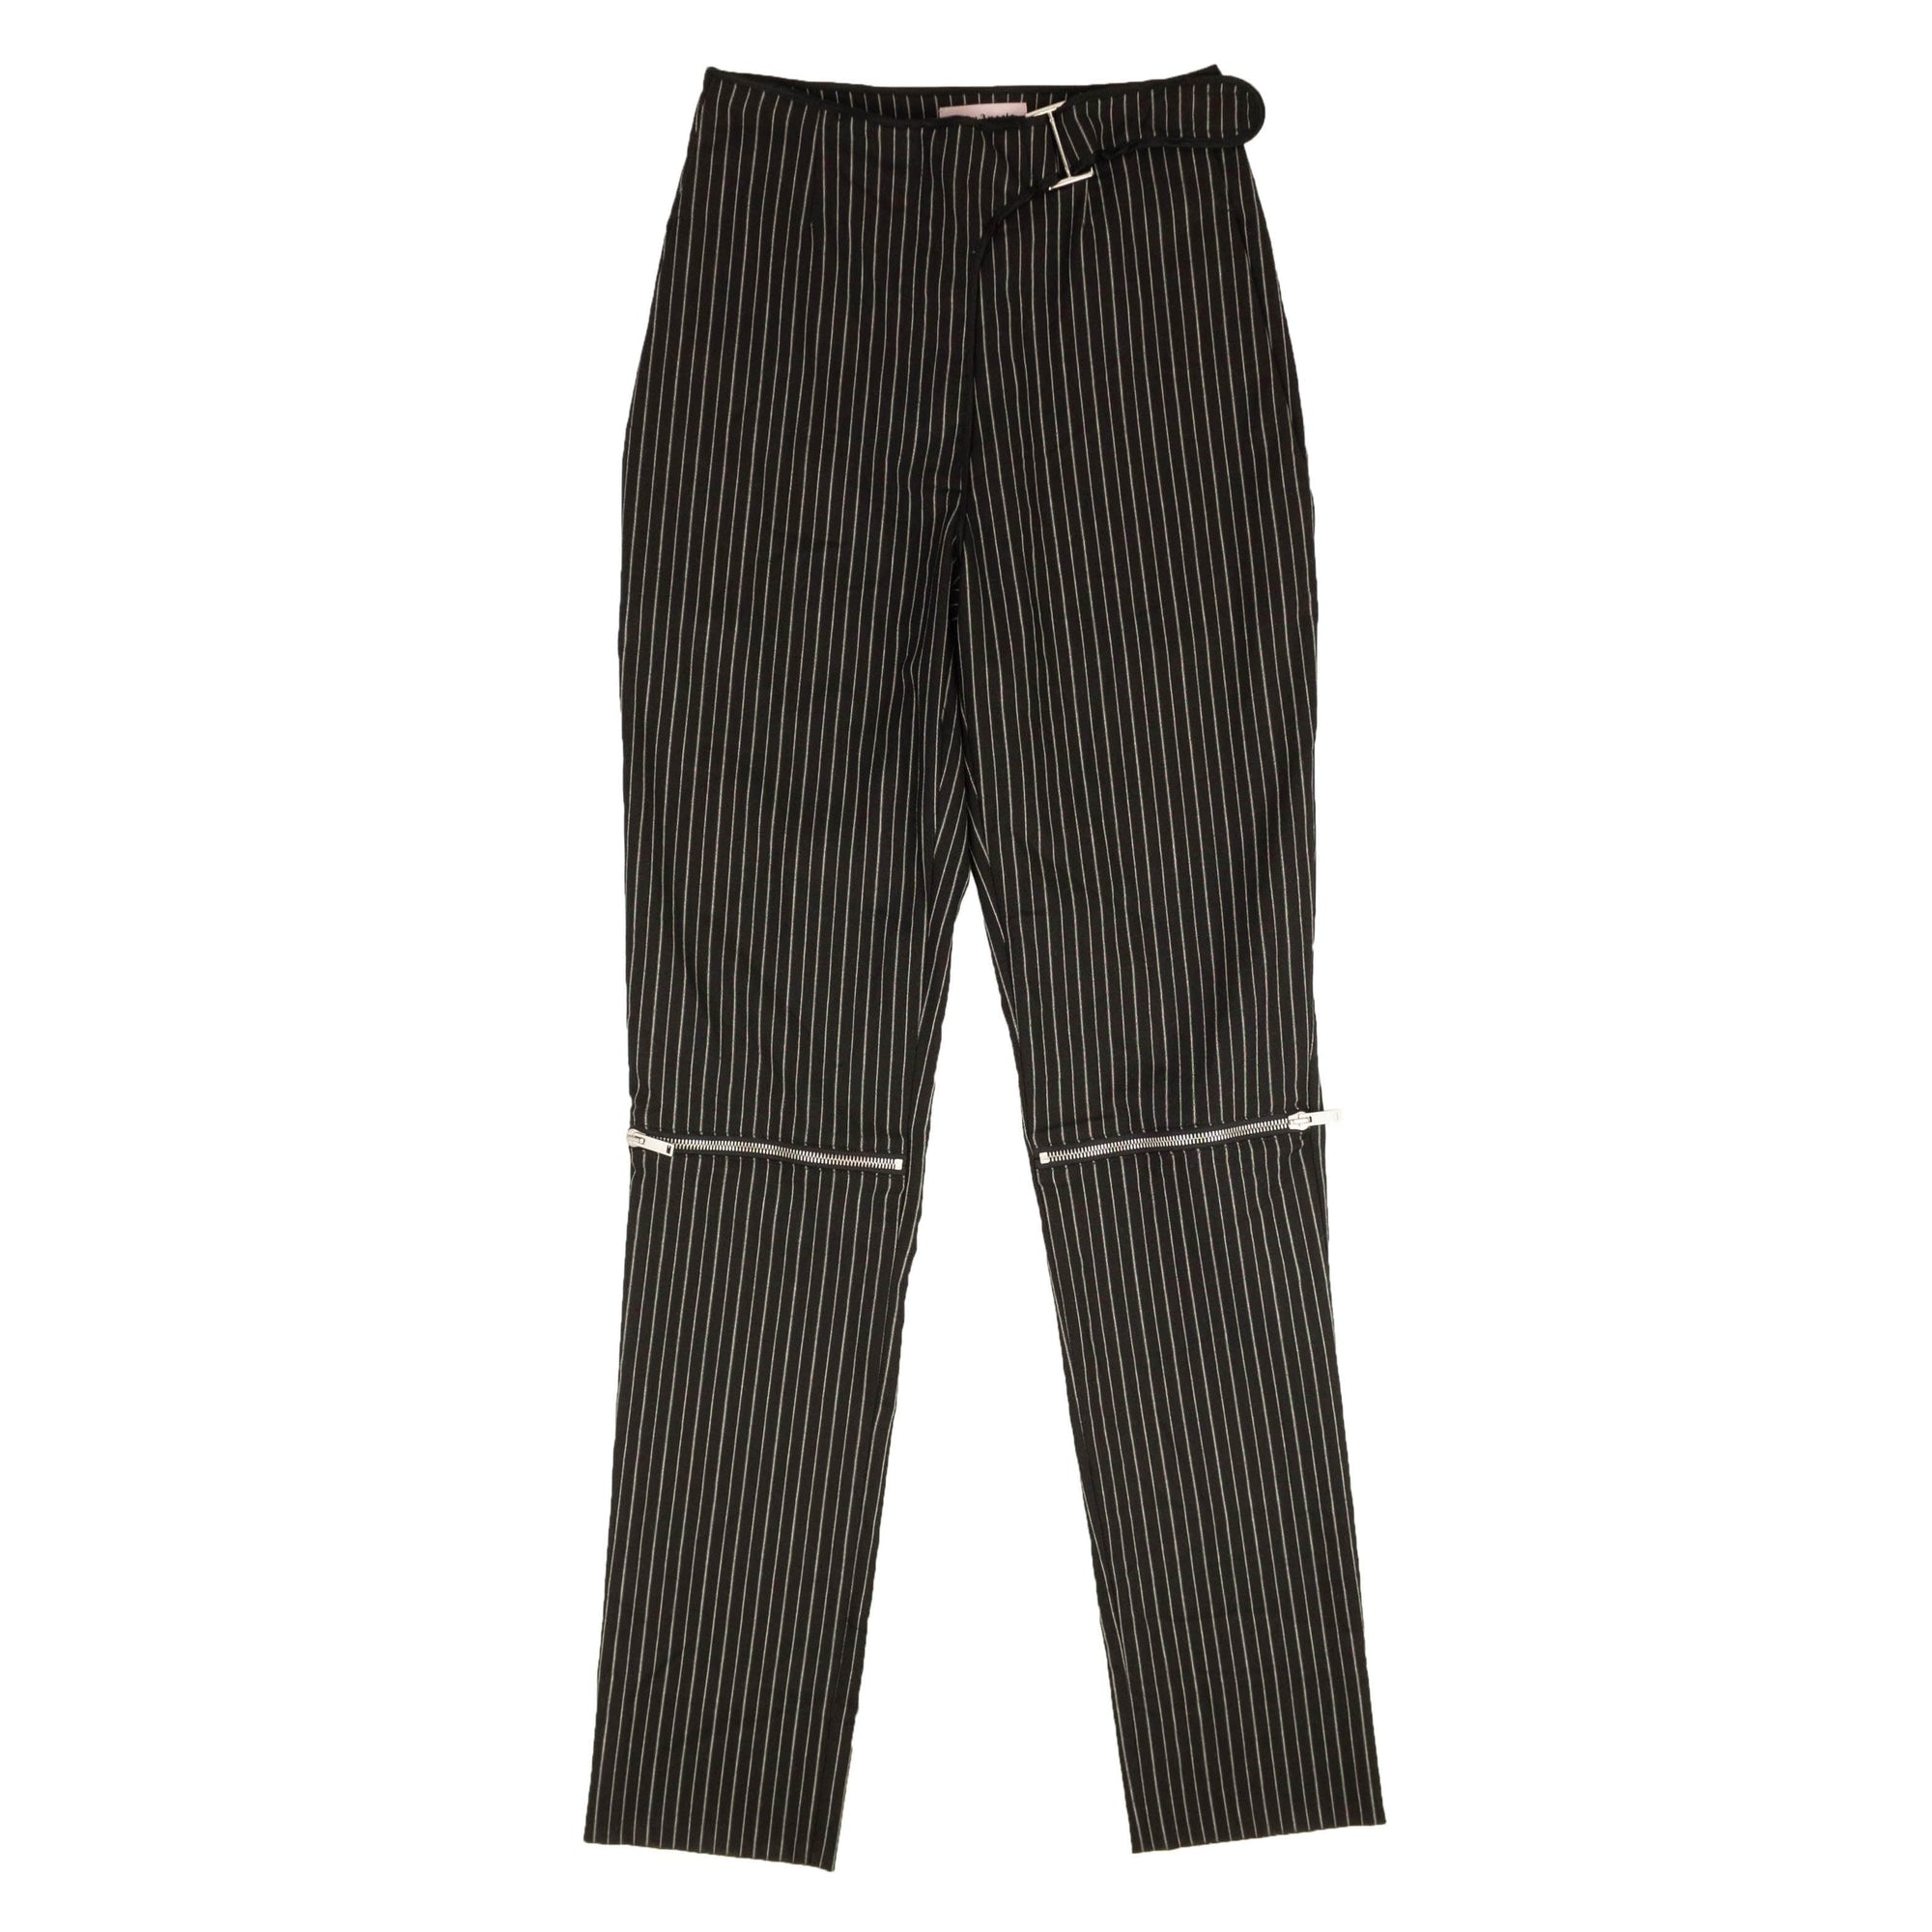 Palm Angels 250-500, channelenable-all, chicmi, couponcollection, gender-womens, main-clothing, palm-angels, size-40, womens-straight-pants 40 Black Pinstripe Buckle Pants 82NGG-PA-1390/40 82NGG-PA-1390/40